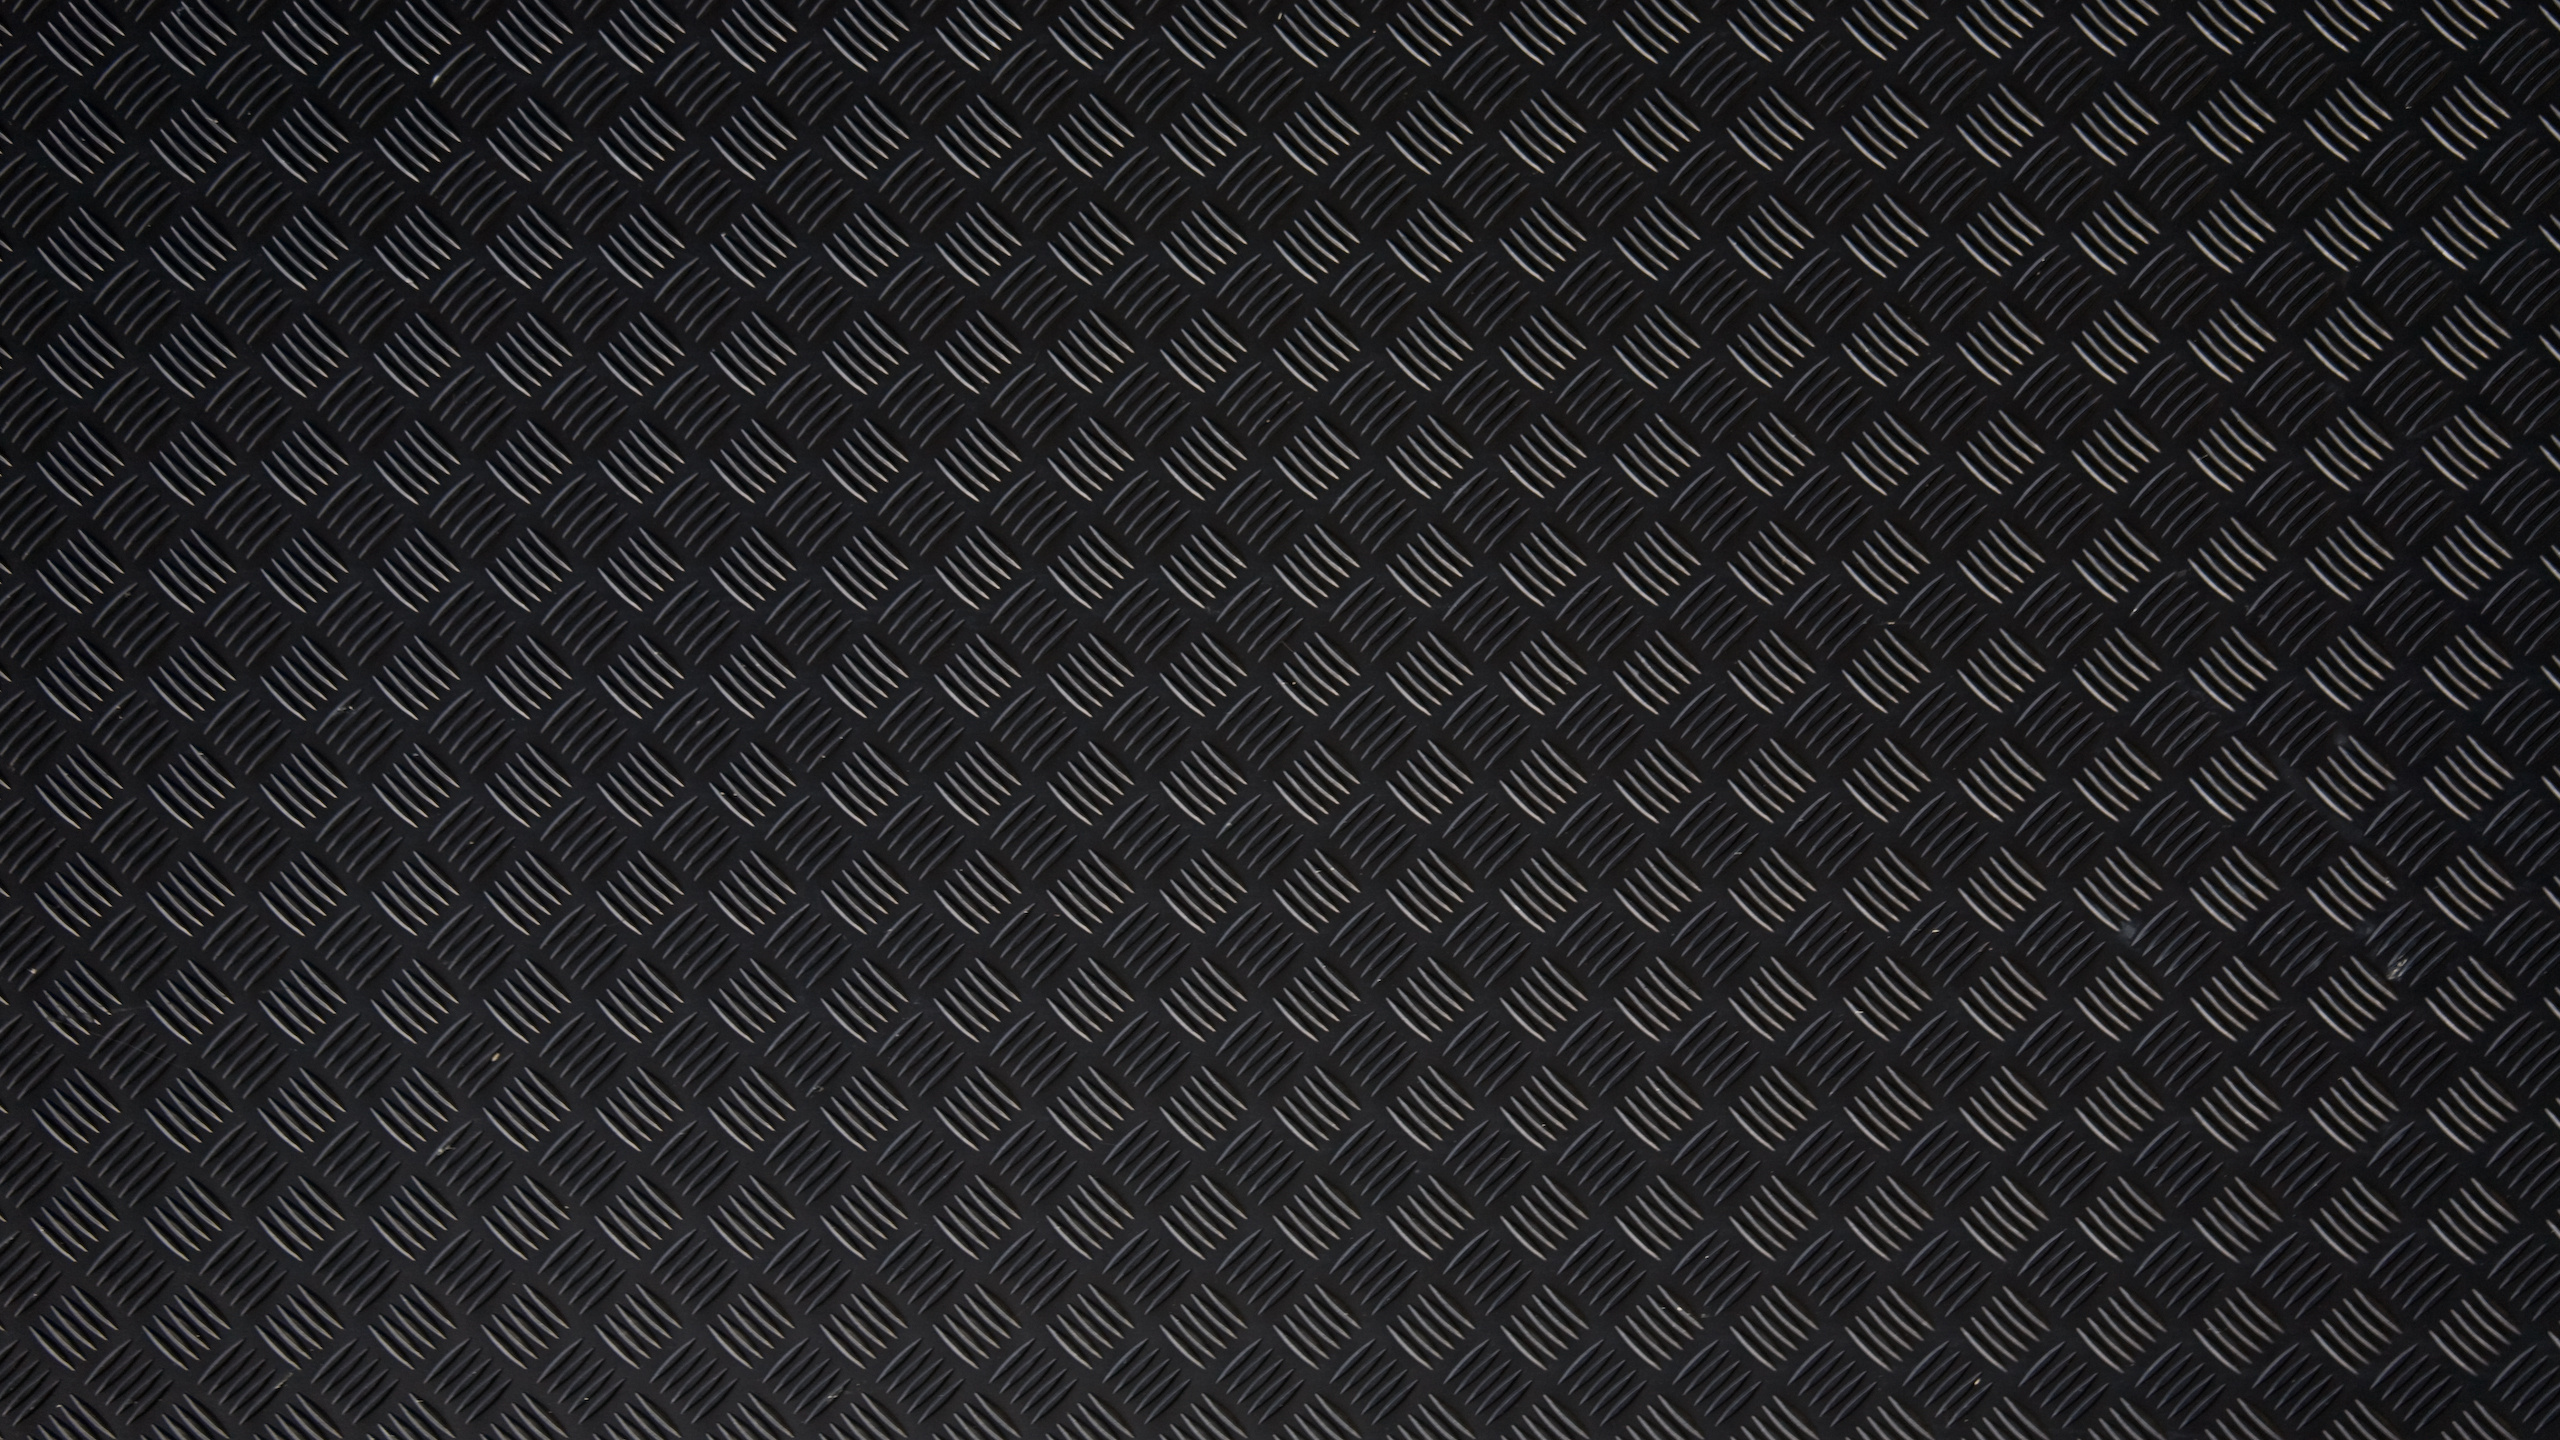 Blue and White Checkered Textile. Wallpaper in 2560x1440 Resolution